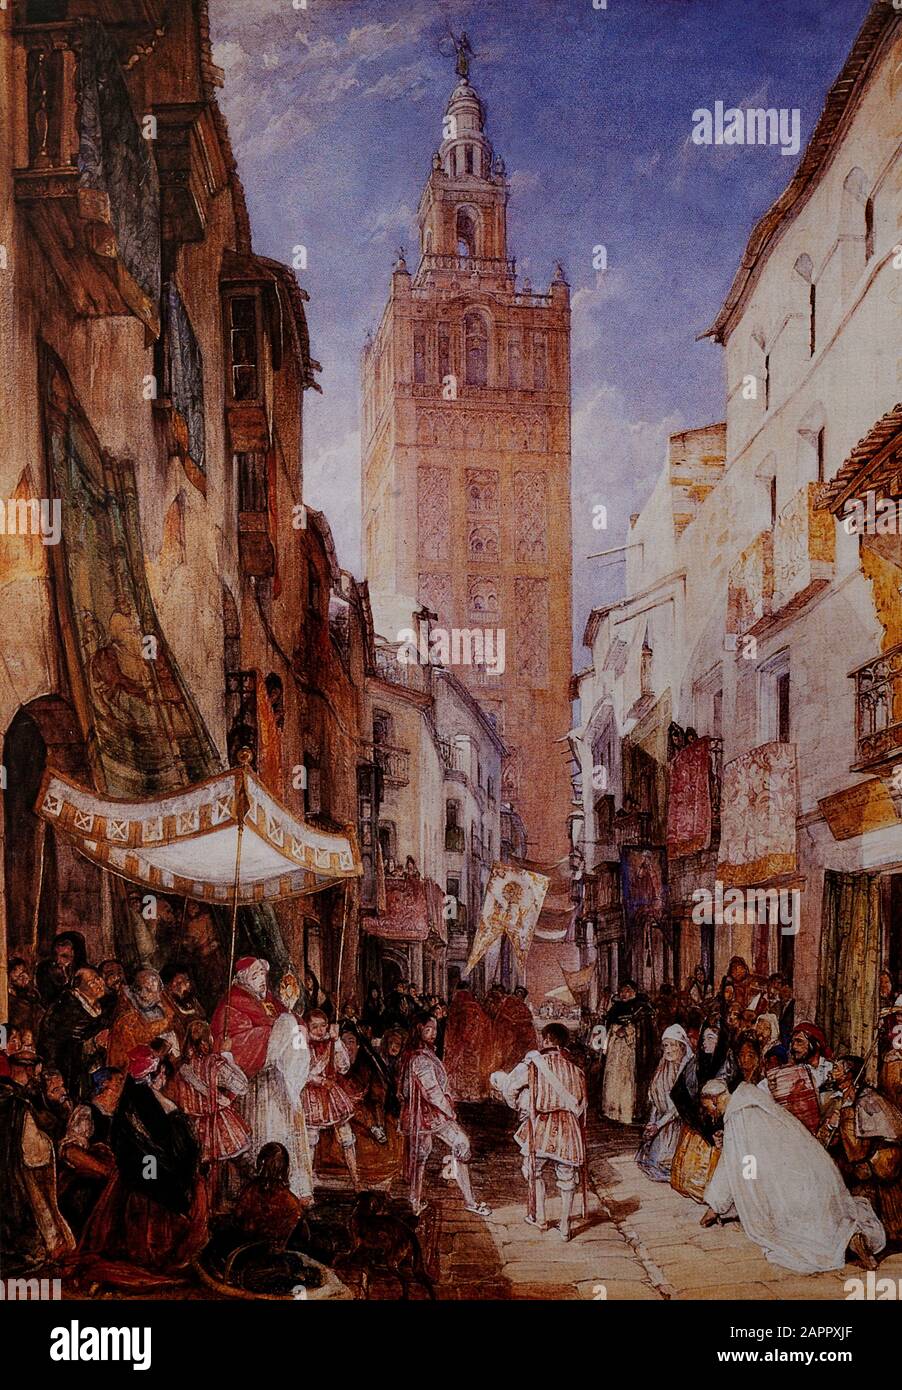 19th Century Religious procession in Seville, Andalusia, Spain, with the Cathedral de Sevilla (La Catedral de Santa María de la Sede) in the background. painting by John Frederick Lewis RA (1804-1876), an English Orientalist painter, who specialised in Oriental and Mediterranean scenes in detailed watercolour or oils. Stock Photo